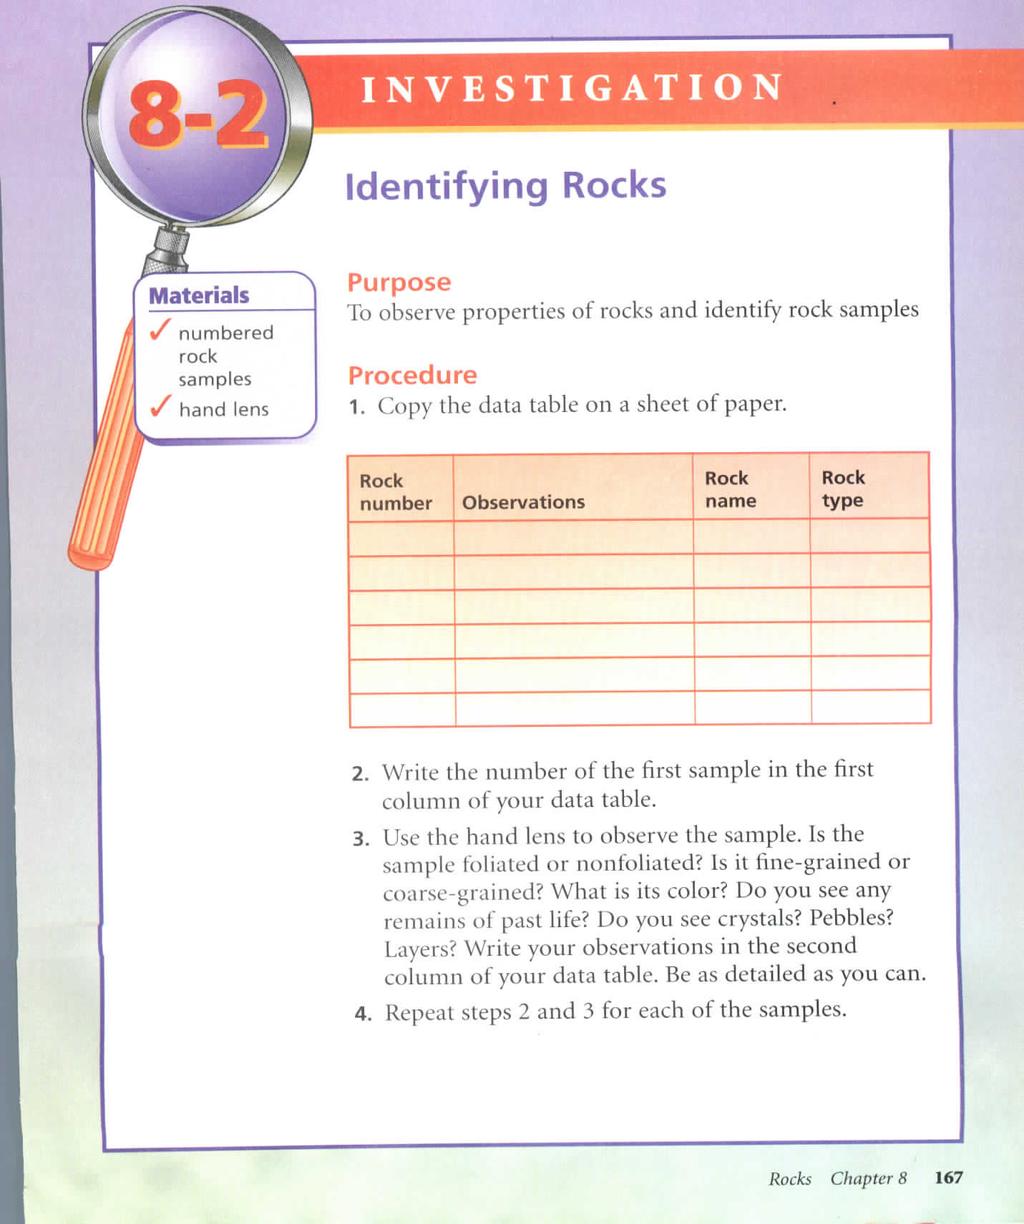 INVESTIGATION Identifying Rocks Materials v numbered rock samples v hand lens Purpose To observe properties of rocks and identify rock samples Procedure 1. Copy the data table on a sheet of paper.